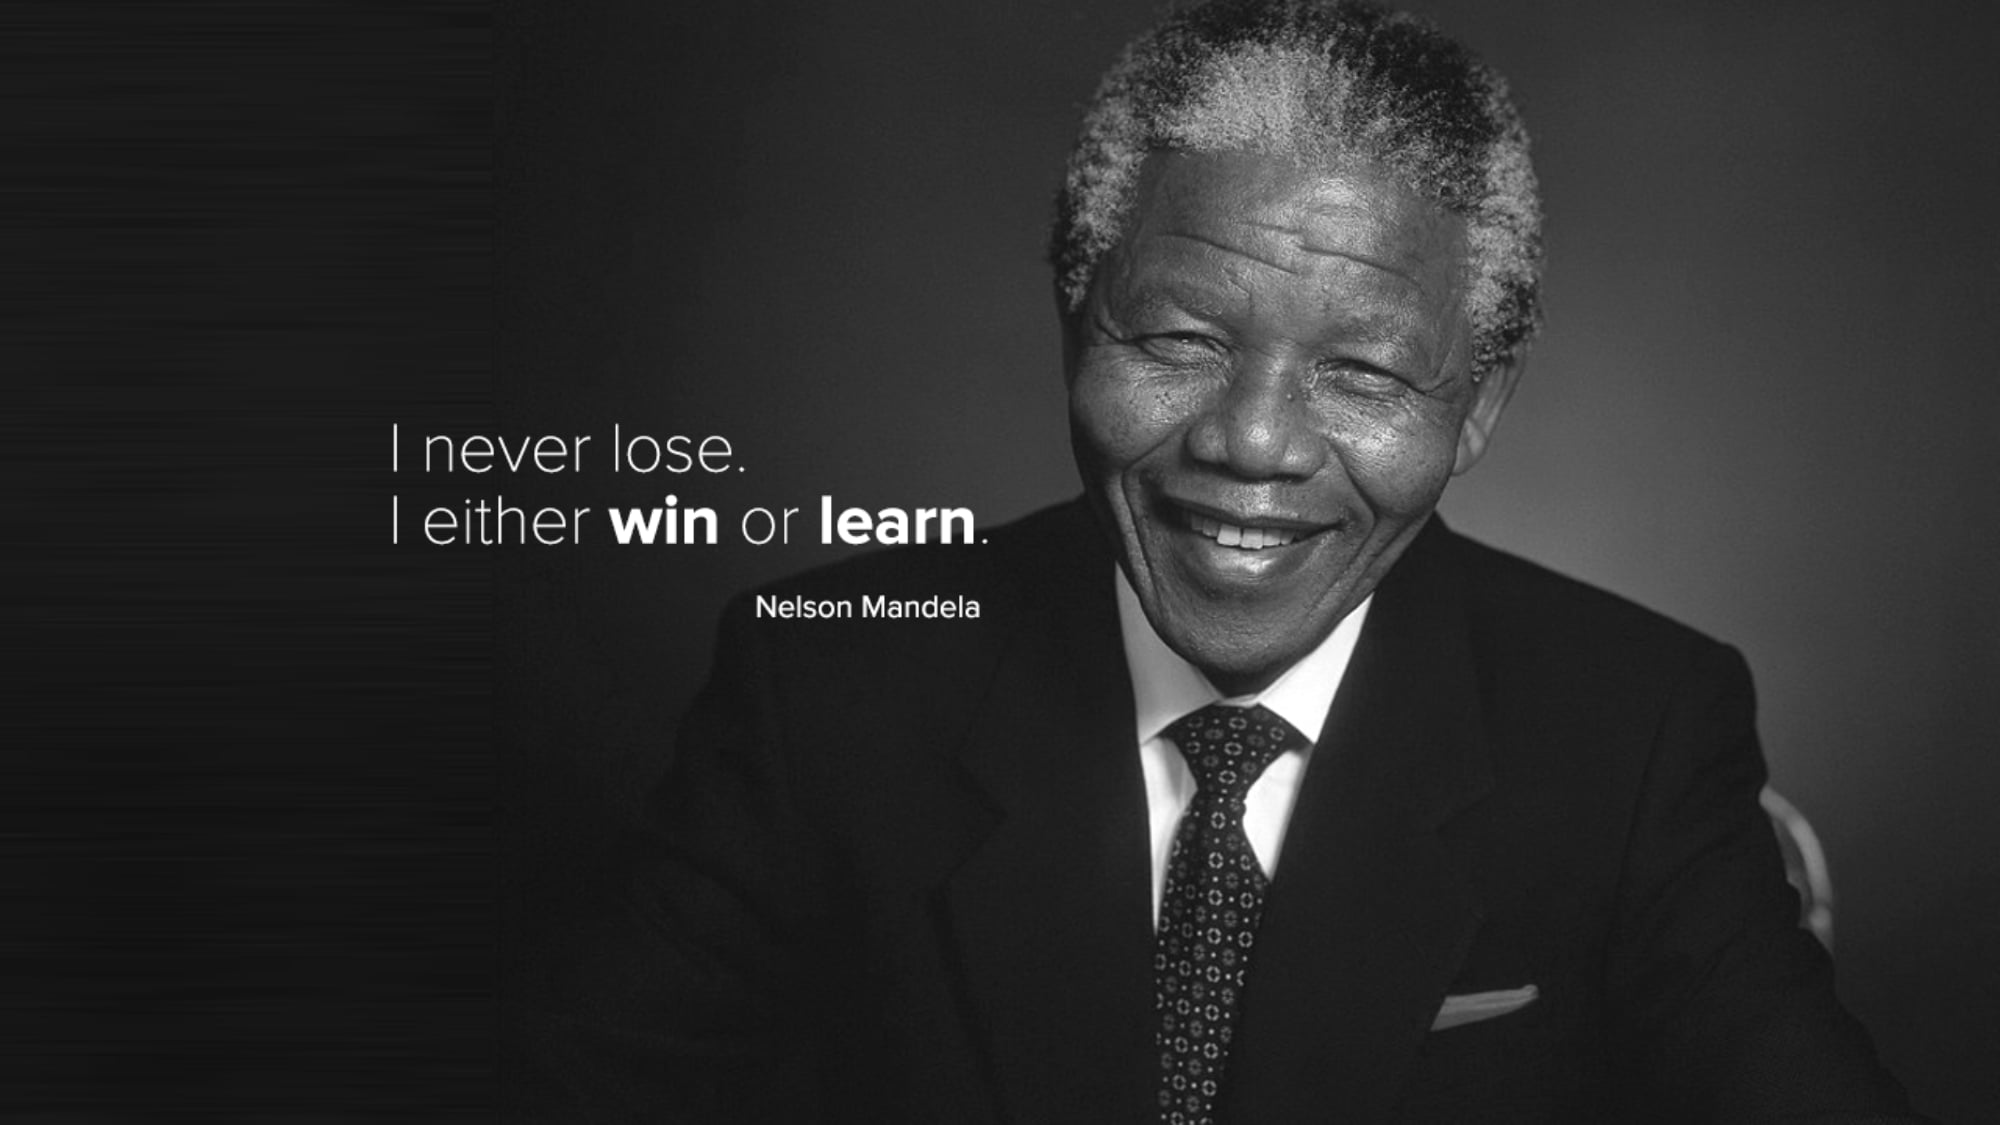 Nelson Mandela Quote Wallpapers - Wallpaper Cave